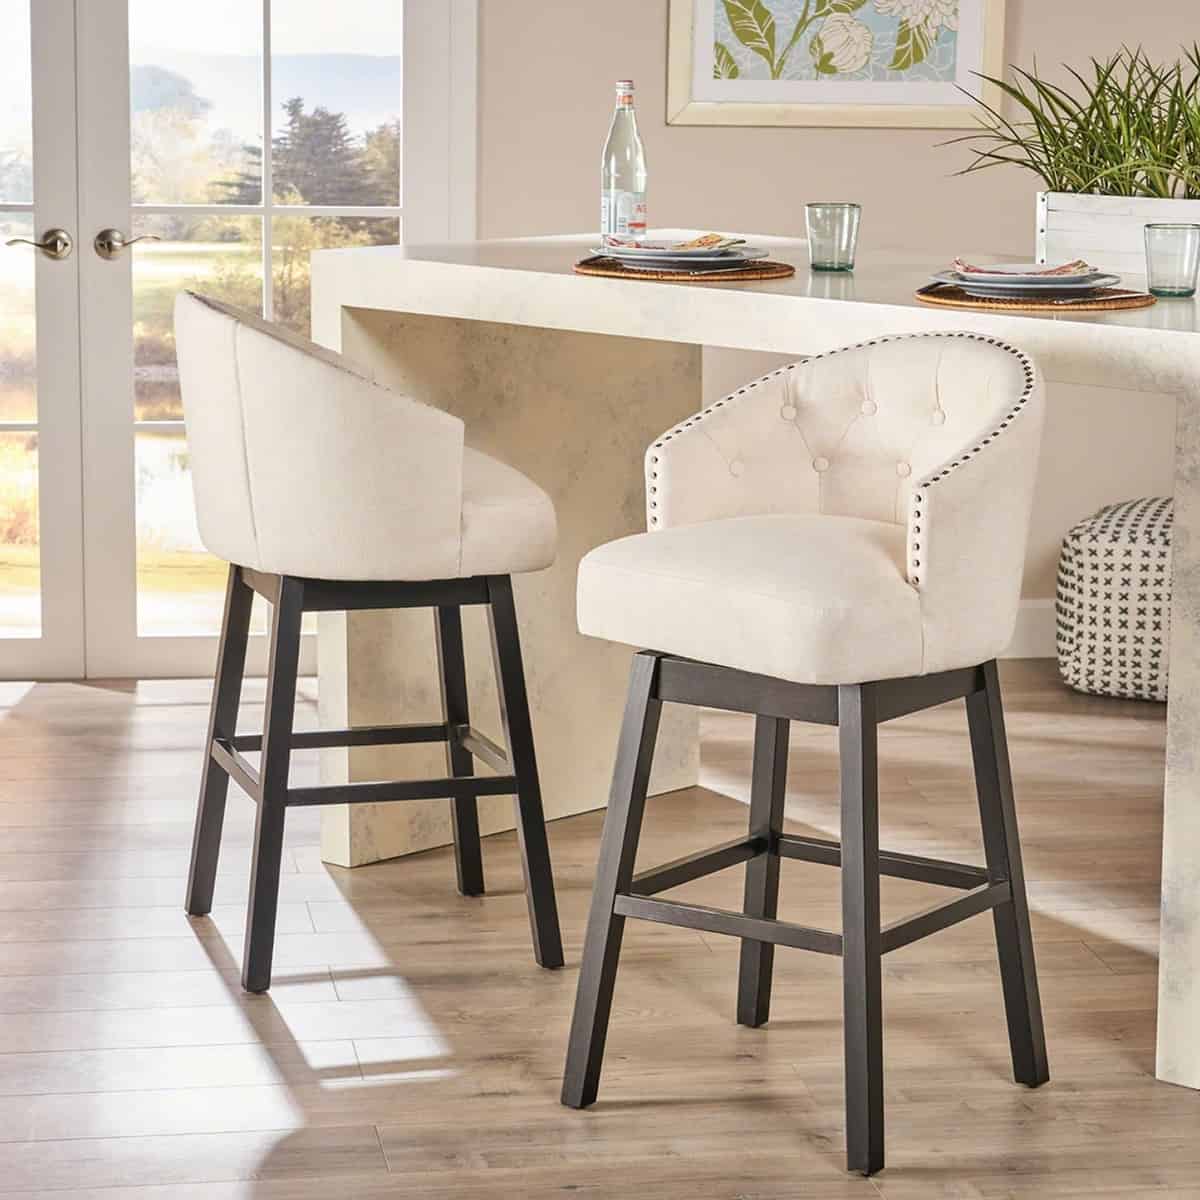 Beige tufted counter stool with beautiful detailing in front of a kitchen counter.